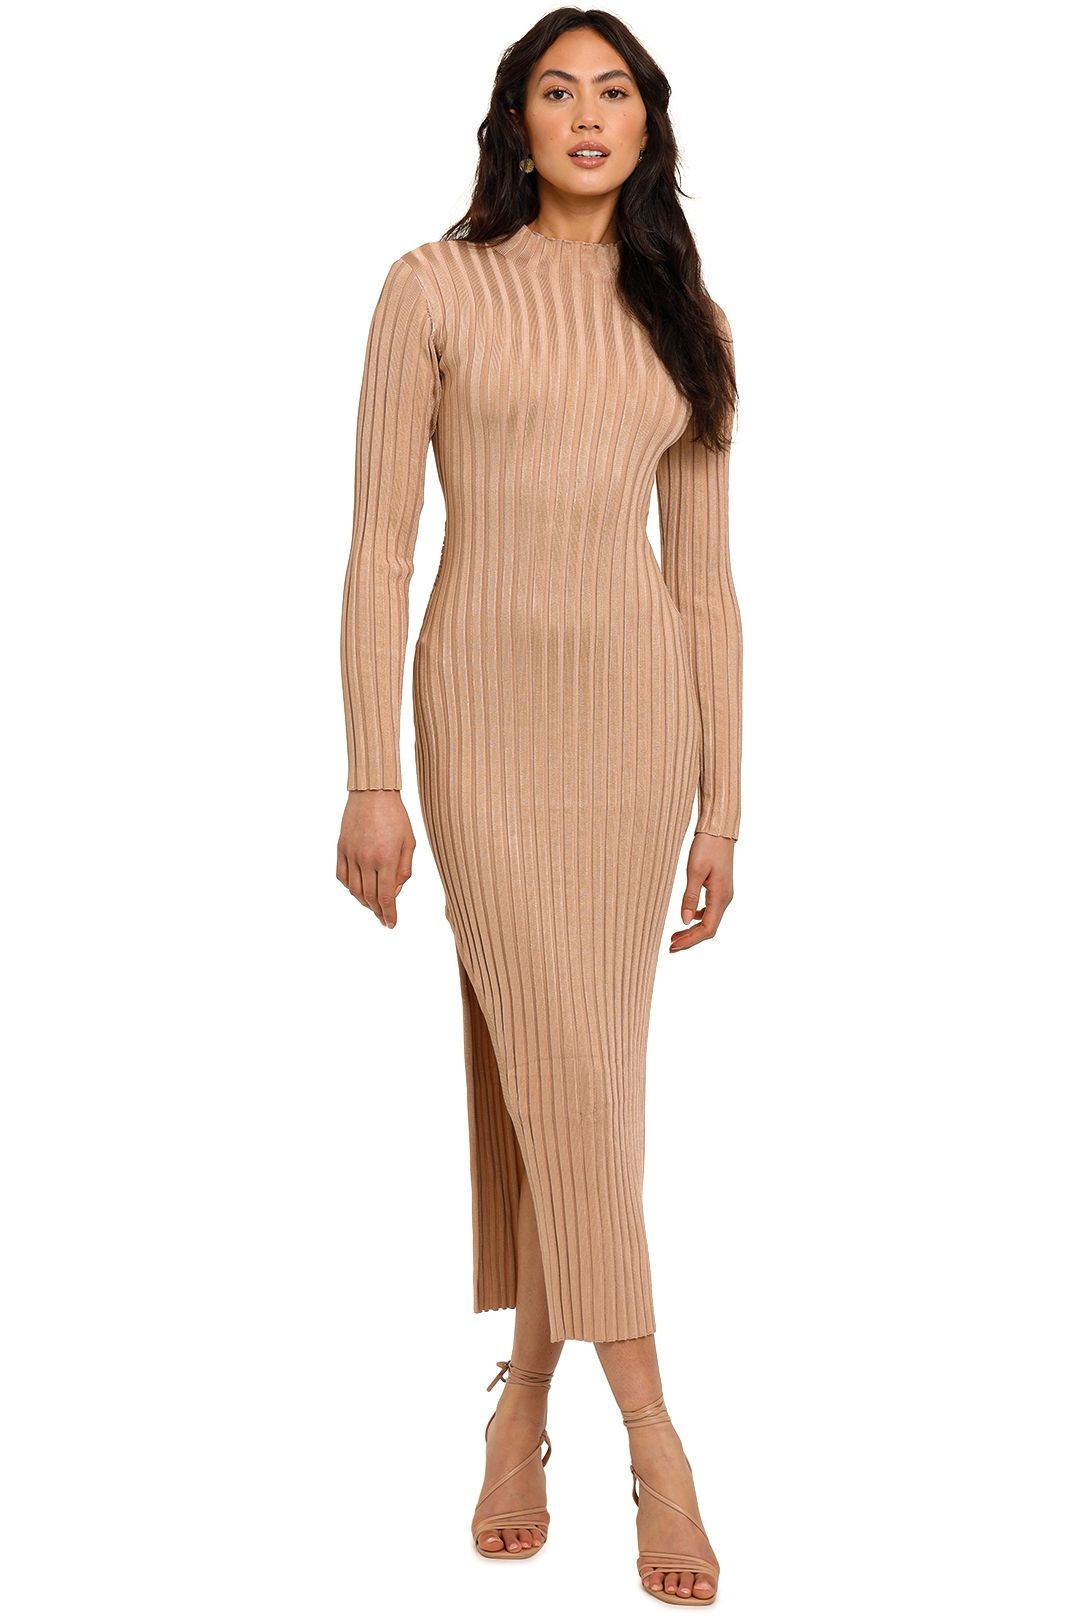 Significant Other Sylvia Knit Dress Champagne midi